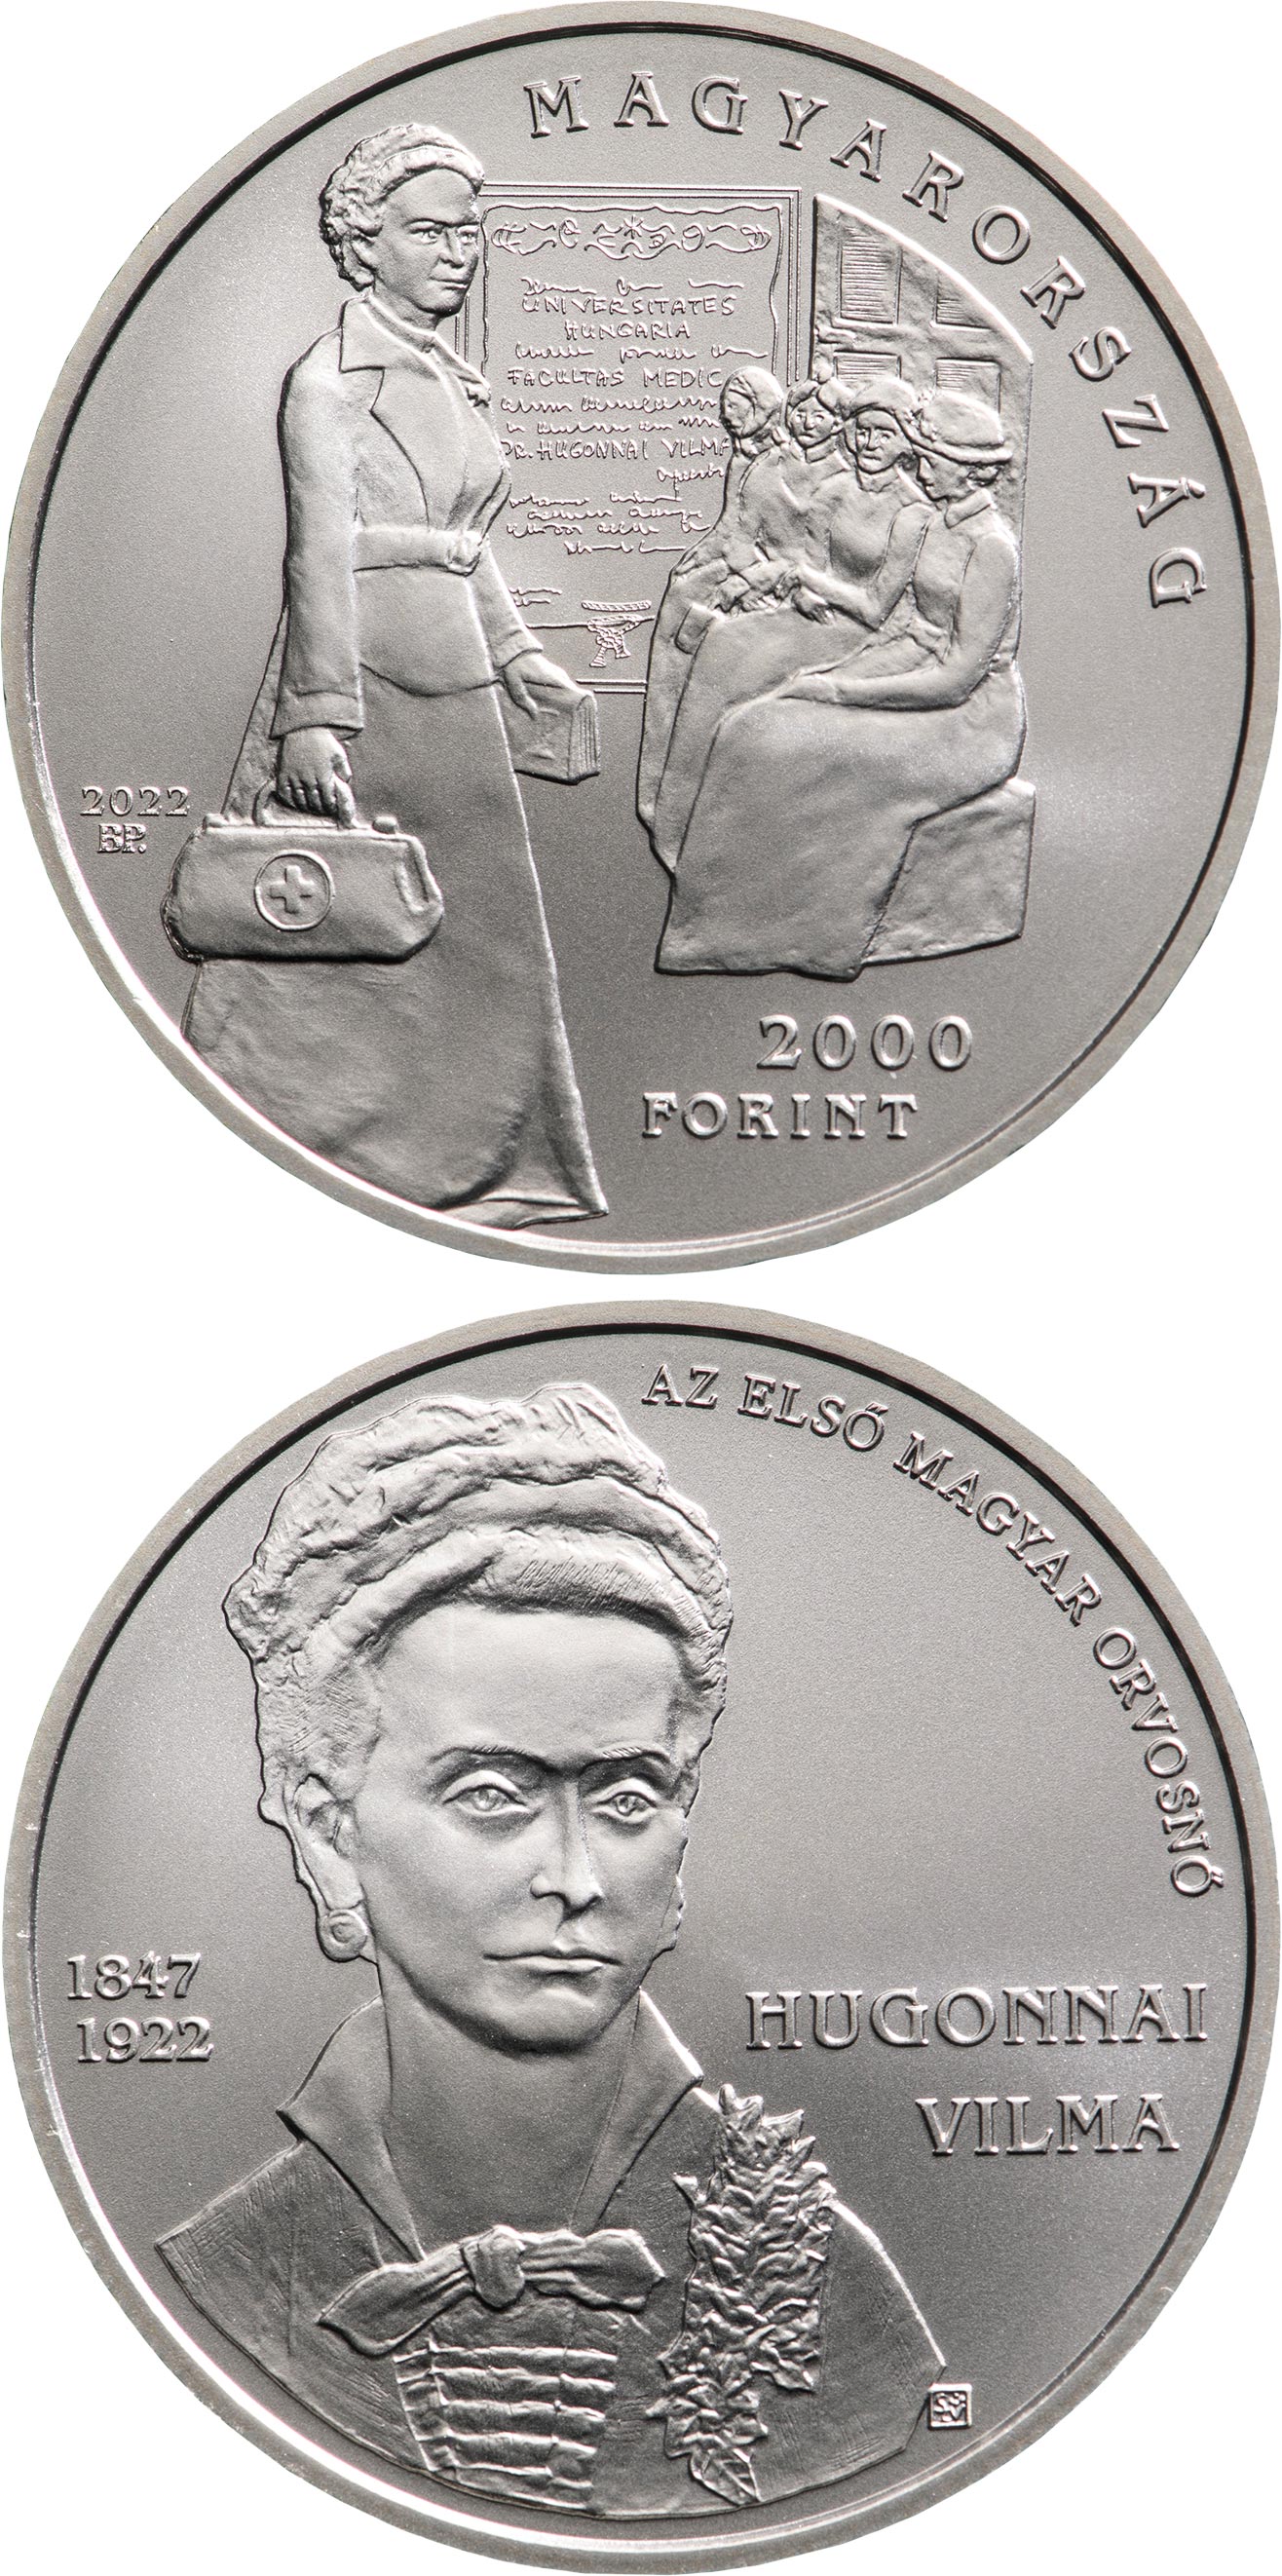 Image of 2000 forint coin - Vilma Hugonnai, the first female doctor in Hungary | Hungary 2022.  The Copper–Nickel (CuNi) coin is of BU quality.